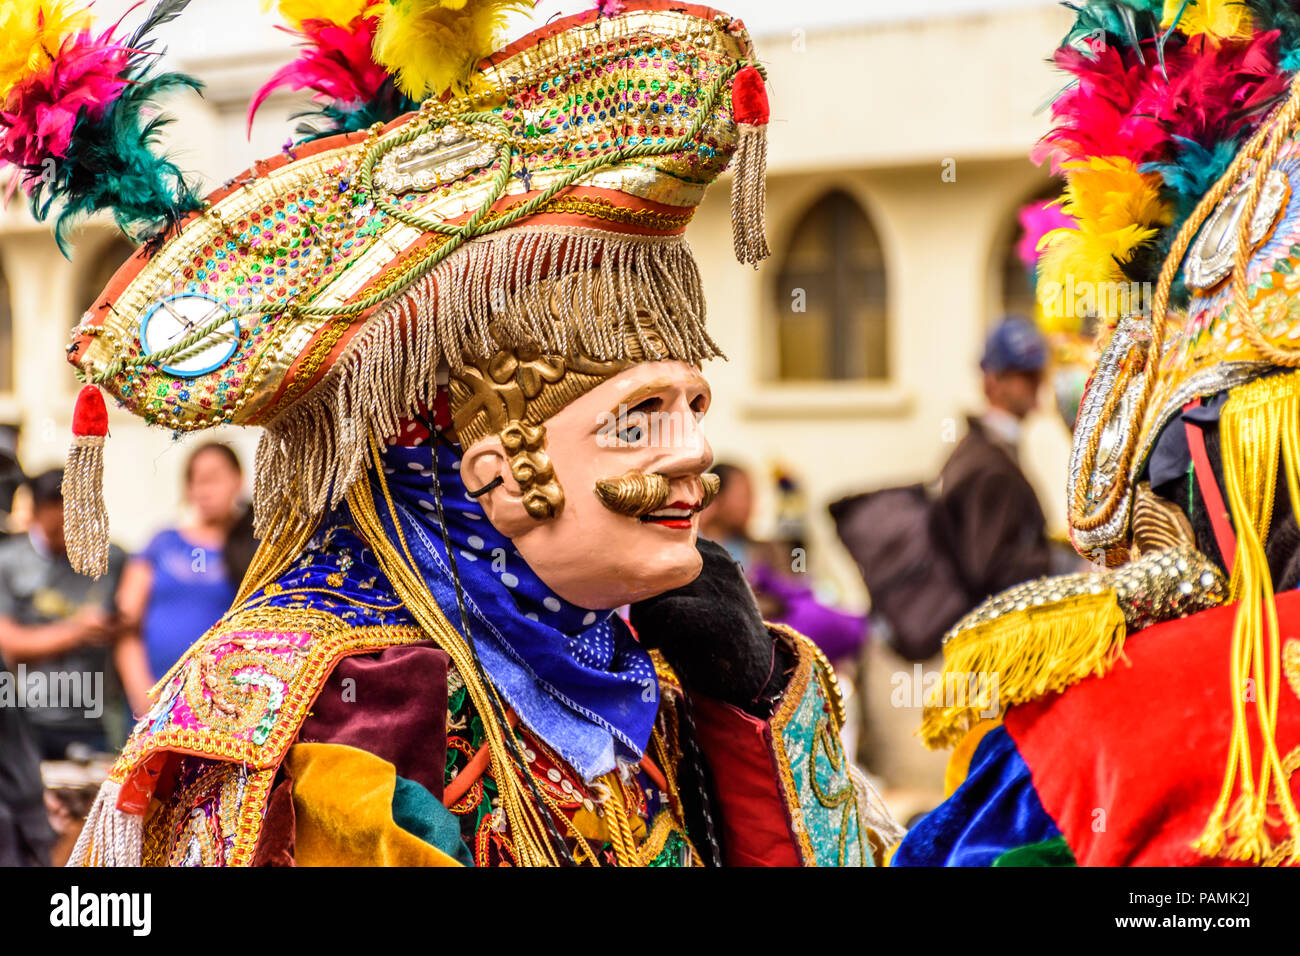 Parramos, Guatemala - December 28, 2016: Traditional folk dancers in mask & costume for Dance of the Moors & Christians near colonial Antigua Stock Photo